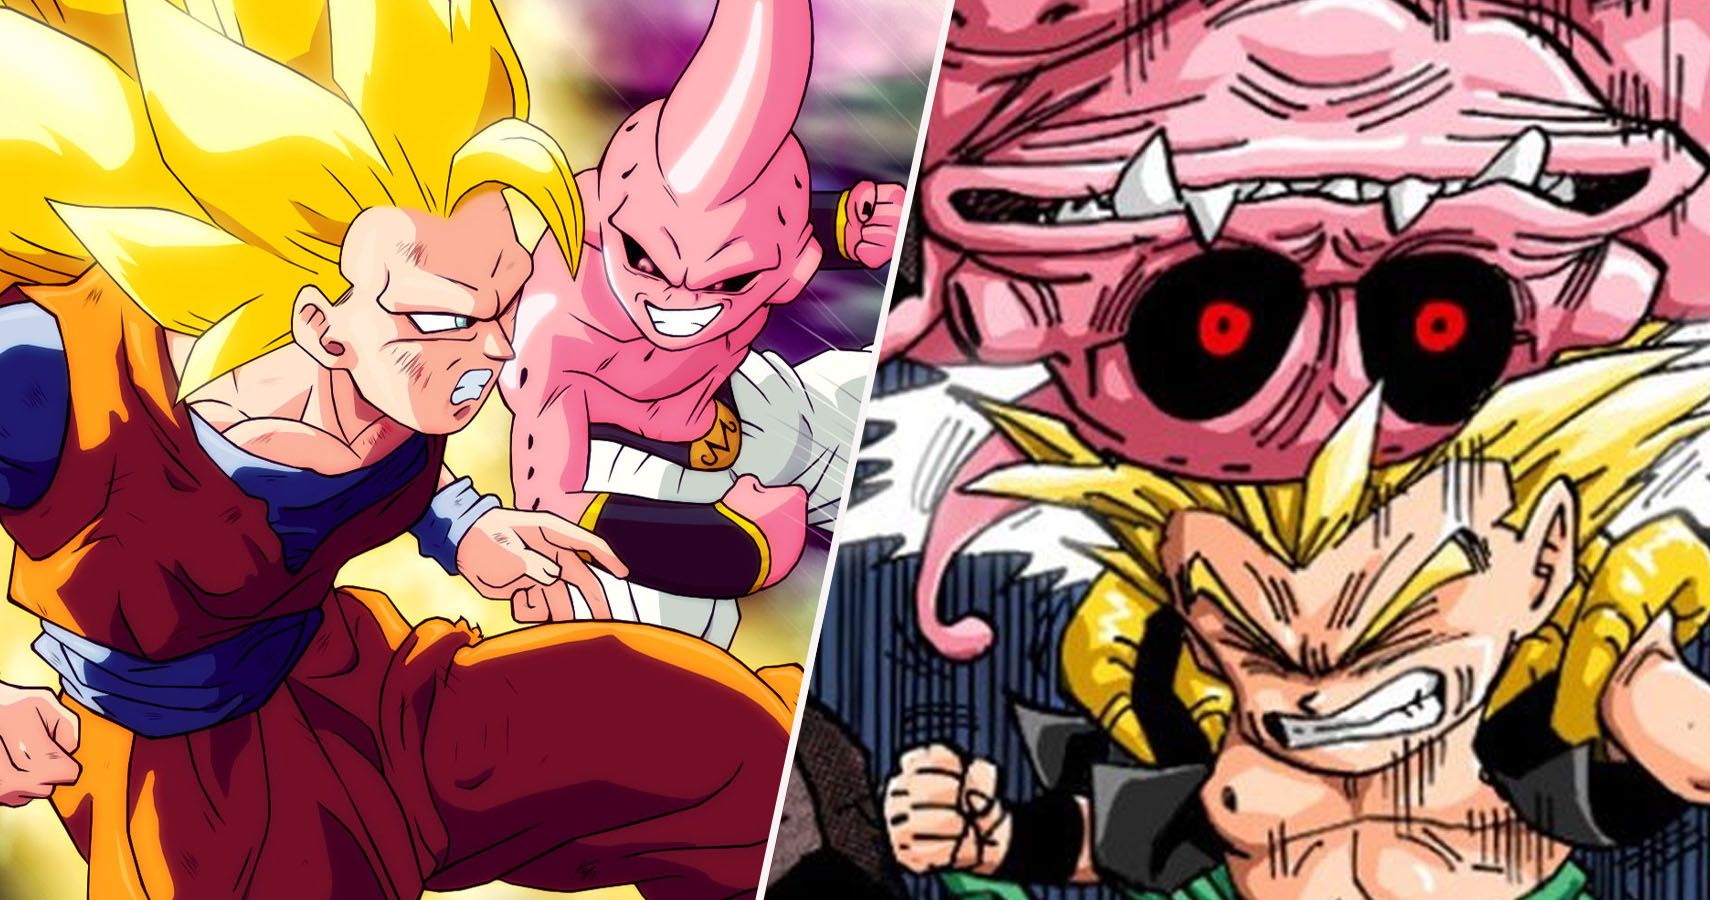 Dragon Ball Z: Every Version Of Majin Buu From Weakest To Most Powerful,  Ranked (According To The Manga)